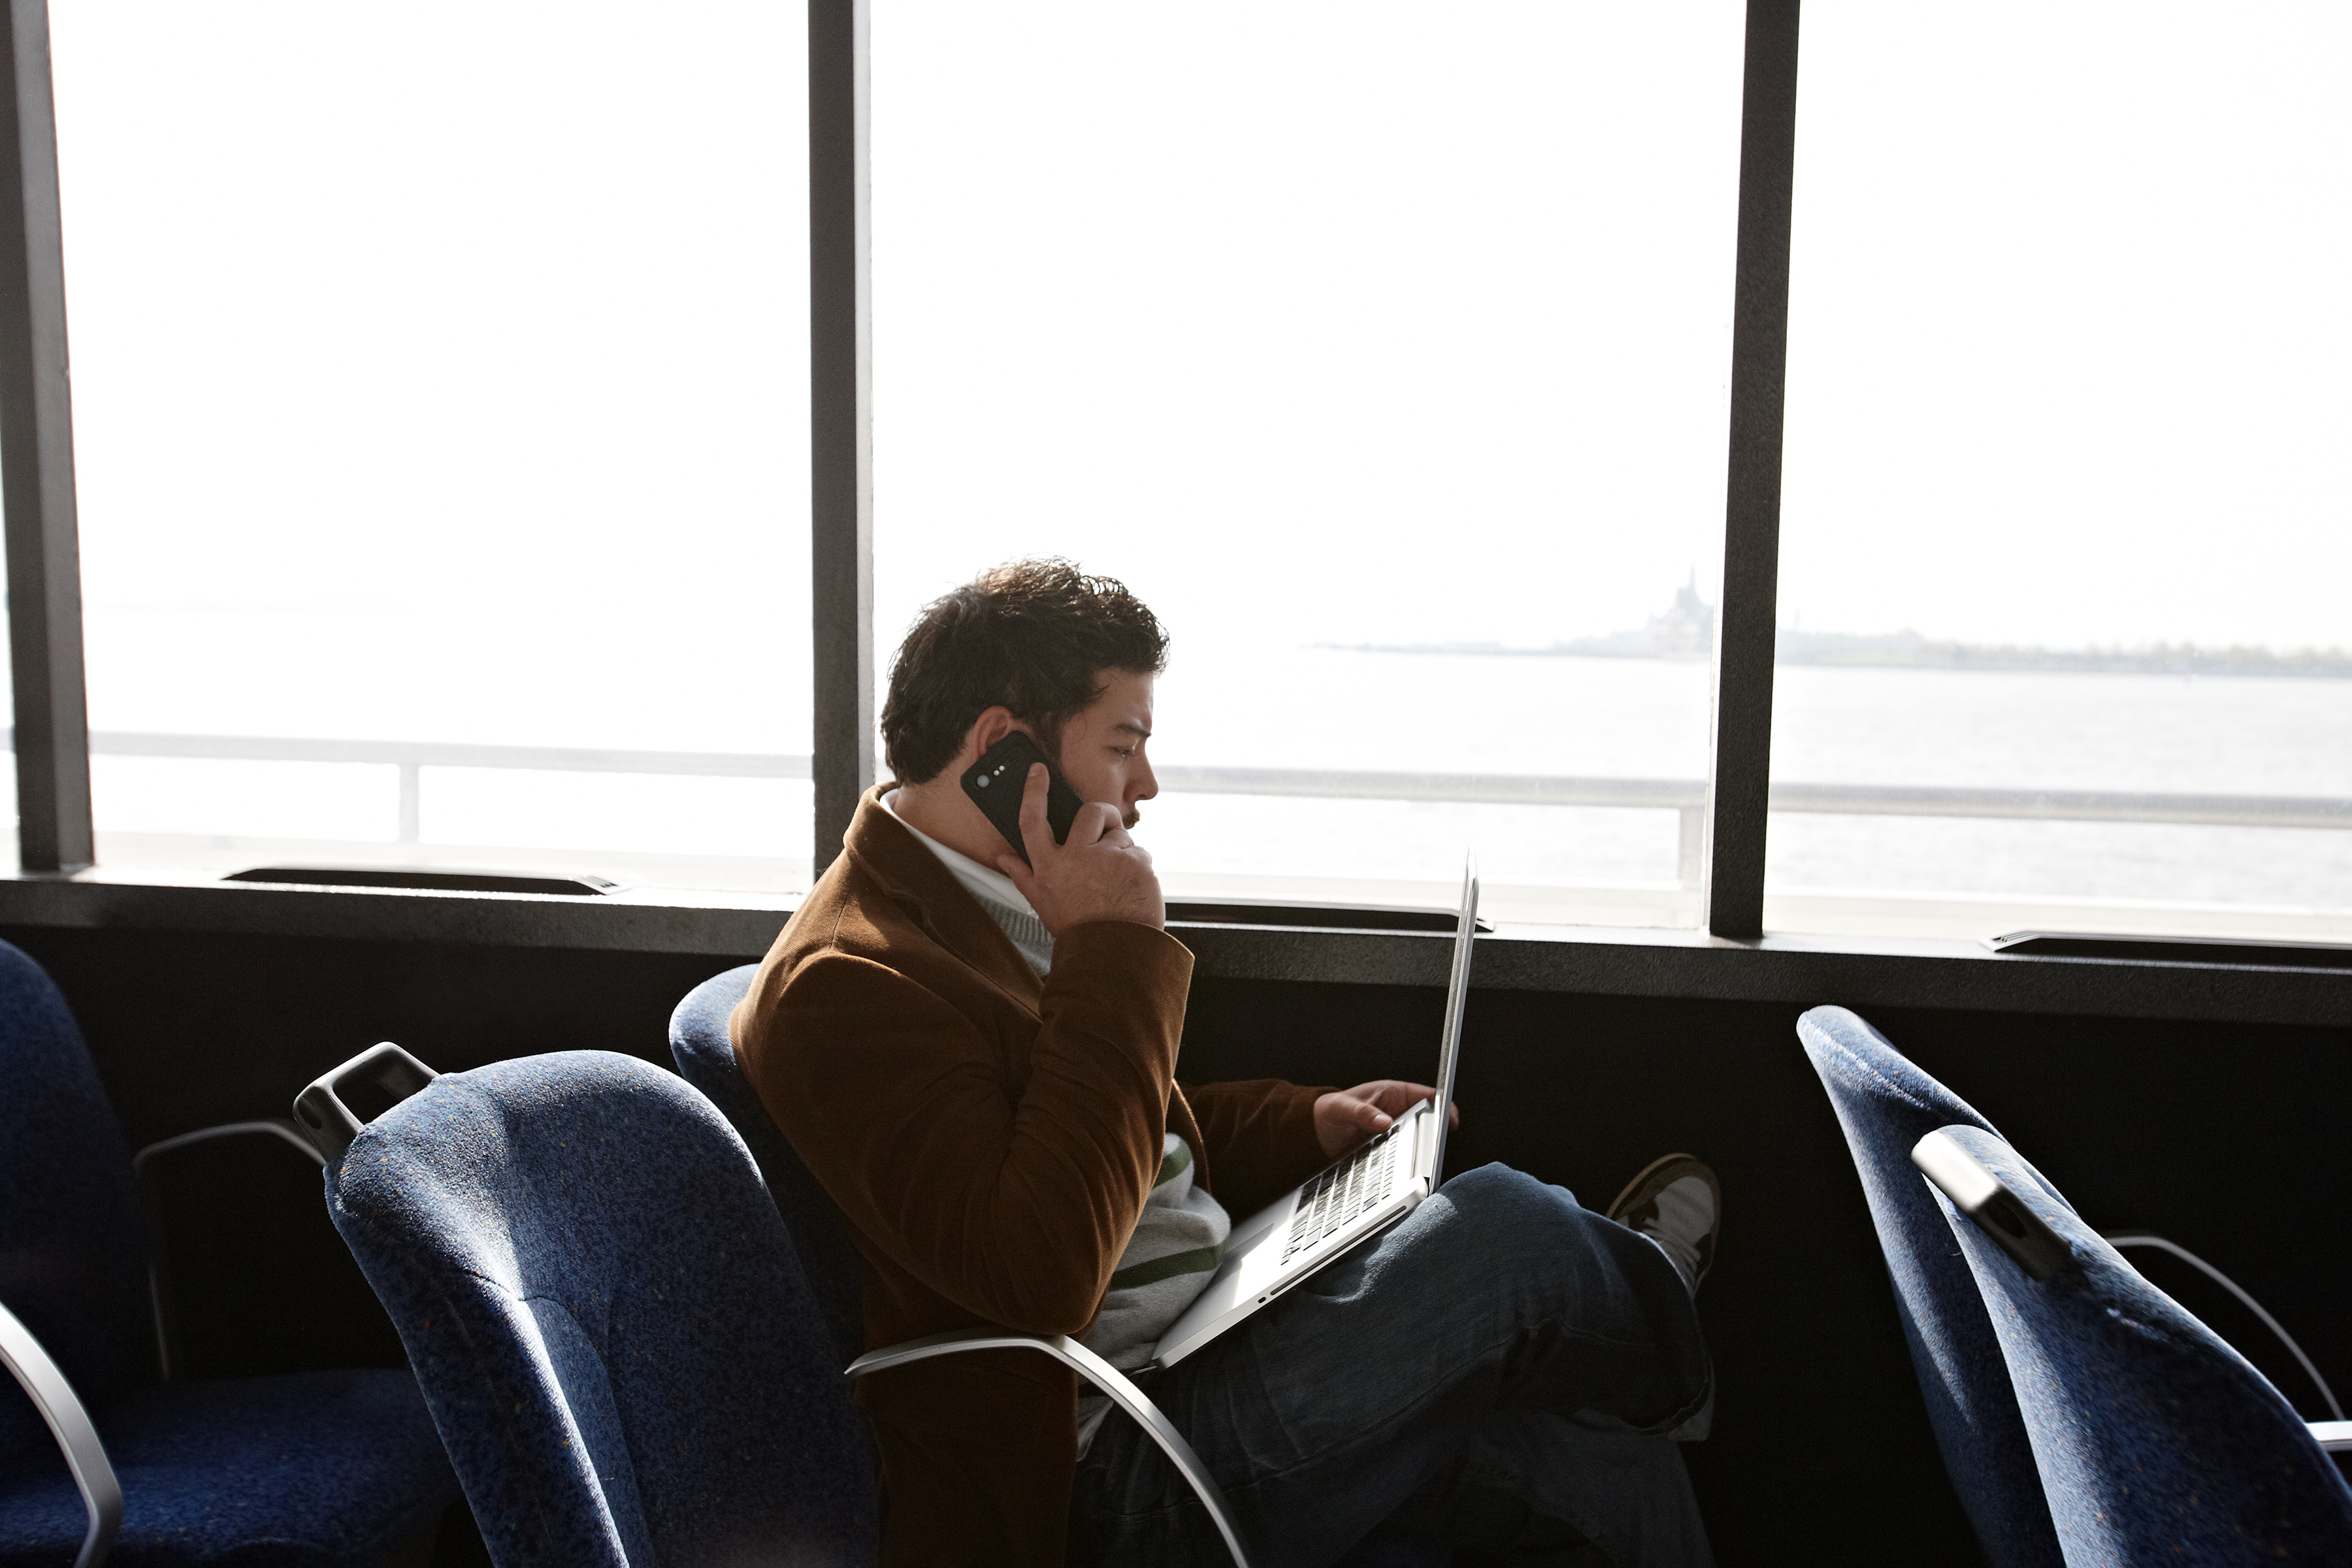 BYOD provides employees the flexibility to use their own devices to work from home or off-site.